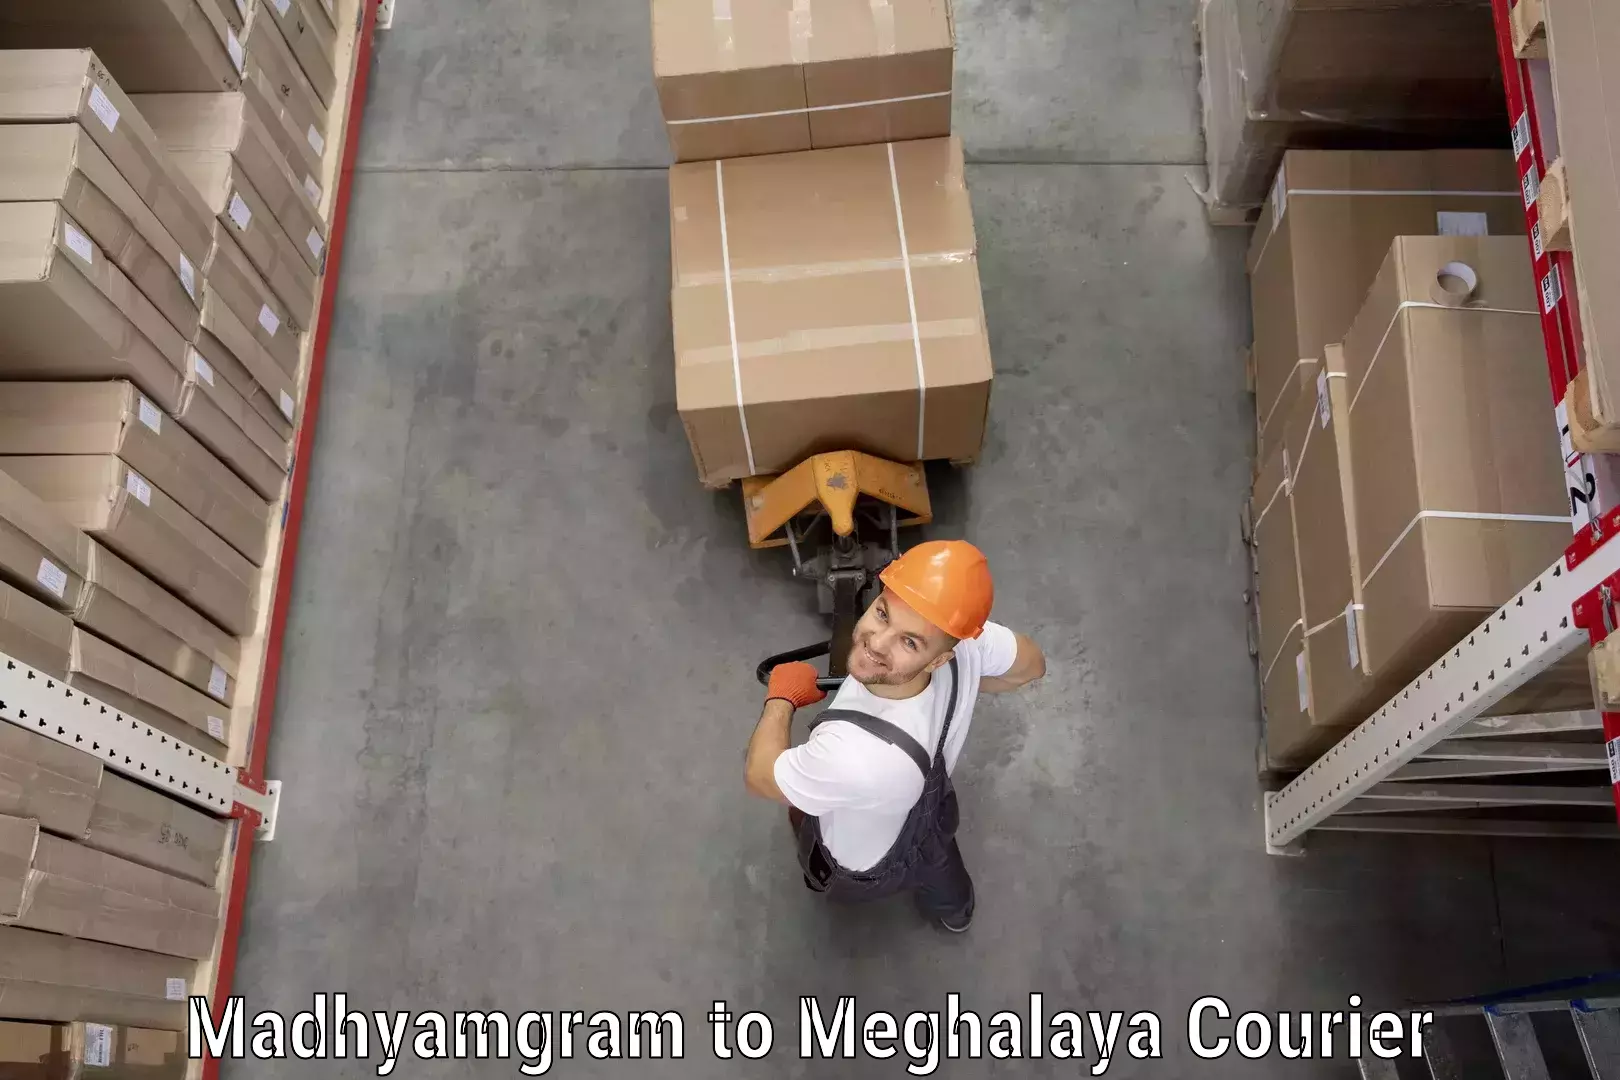 Reliable delivery network Madhyamgram to Meghalaya